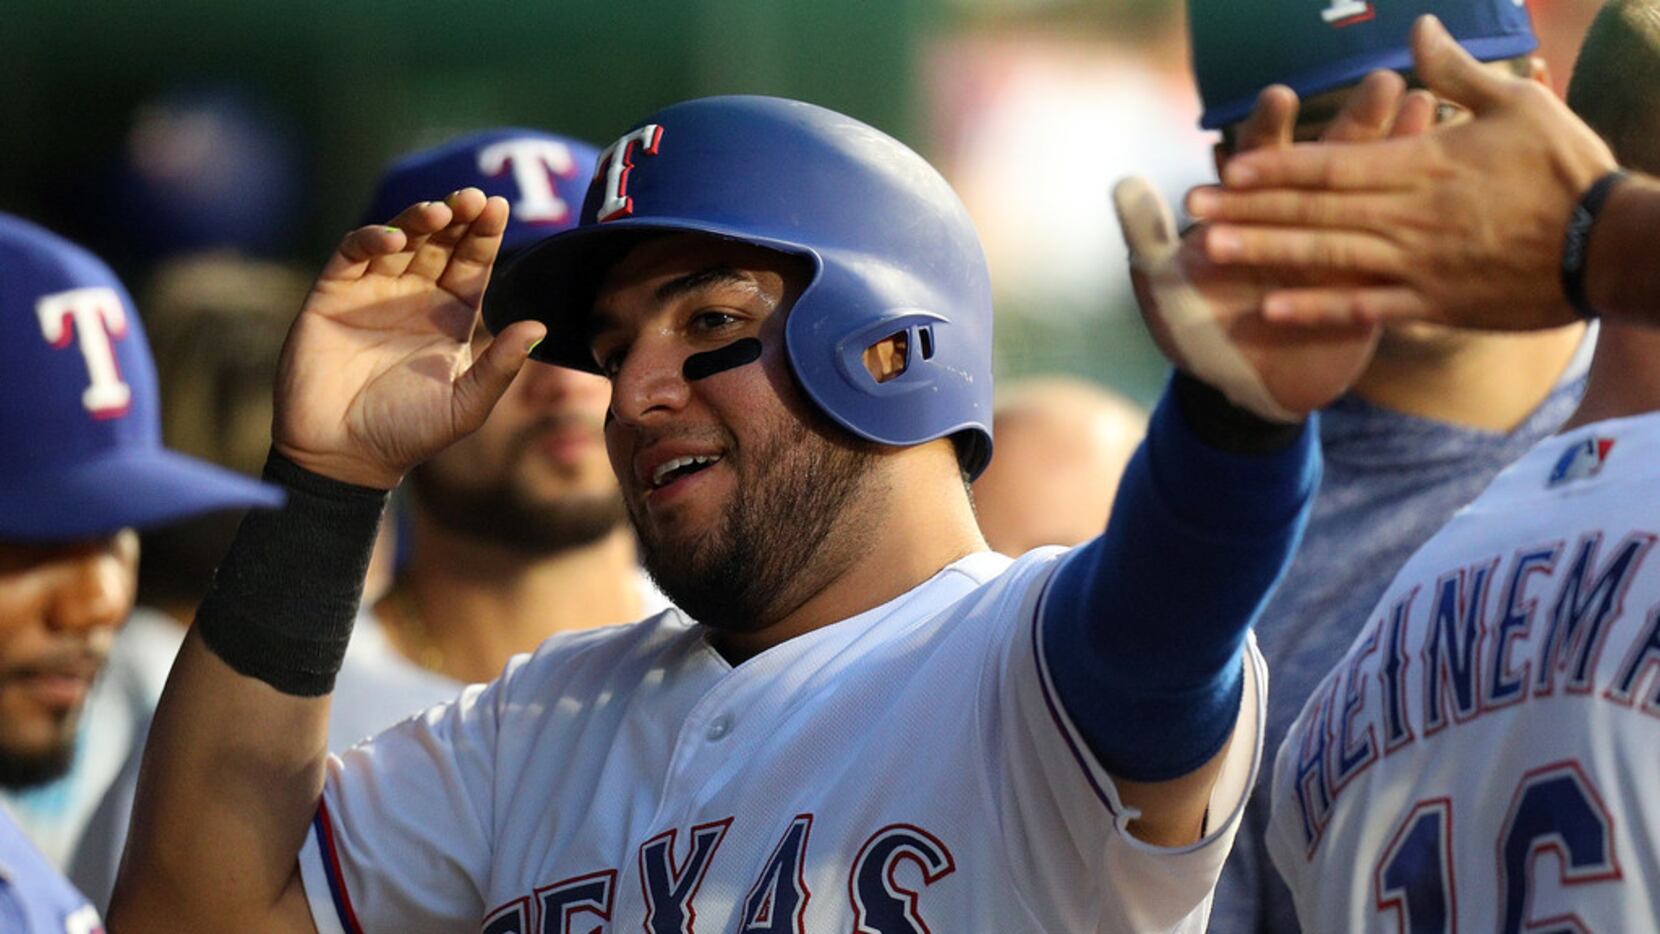 Texas Rangers: Call Up of Jose Trevino Should Be His Last